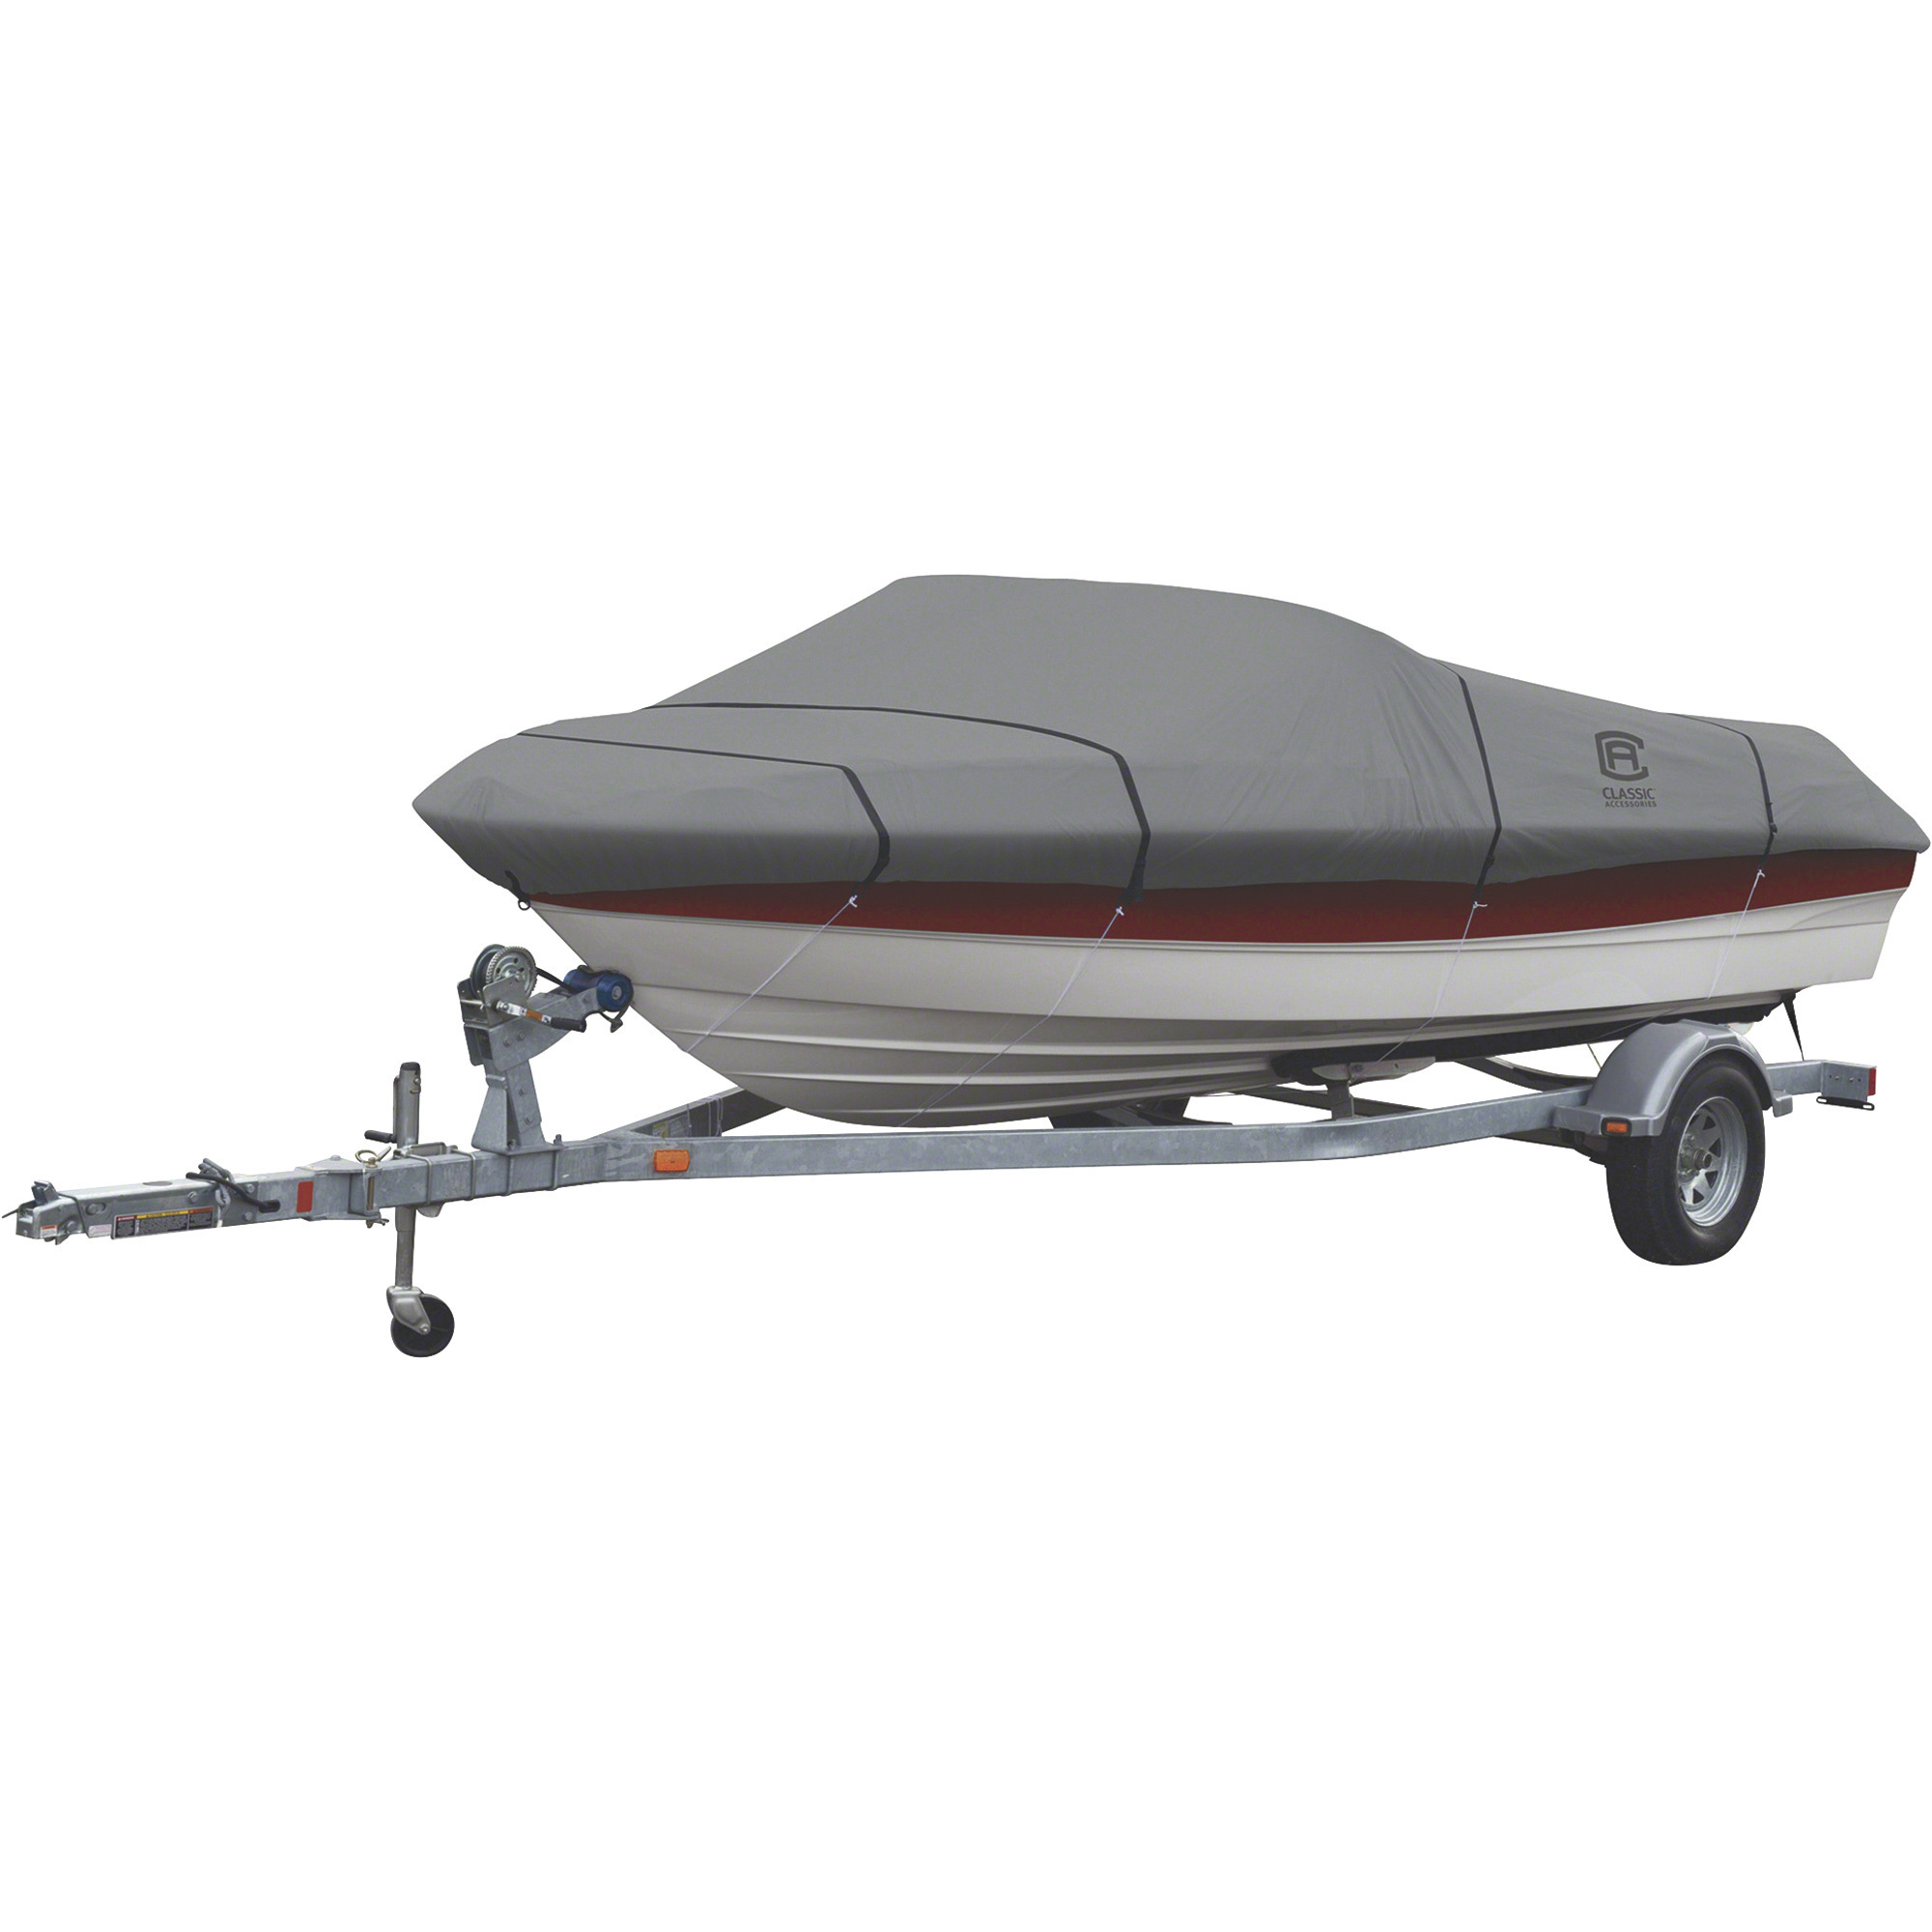 Classic Accessories Lunex RS-1 Trailerable Boat Cover, Fits 14ft.-16ft.  V-Hull Fishing Boats (Beam Width up to 75in.), Gray, Model#  20-140-081001-00